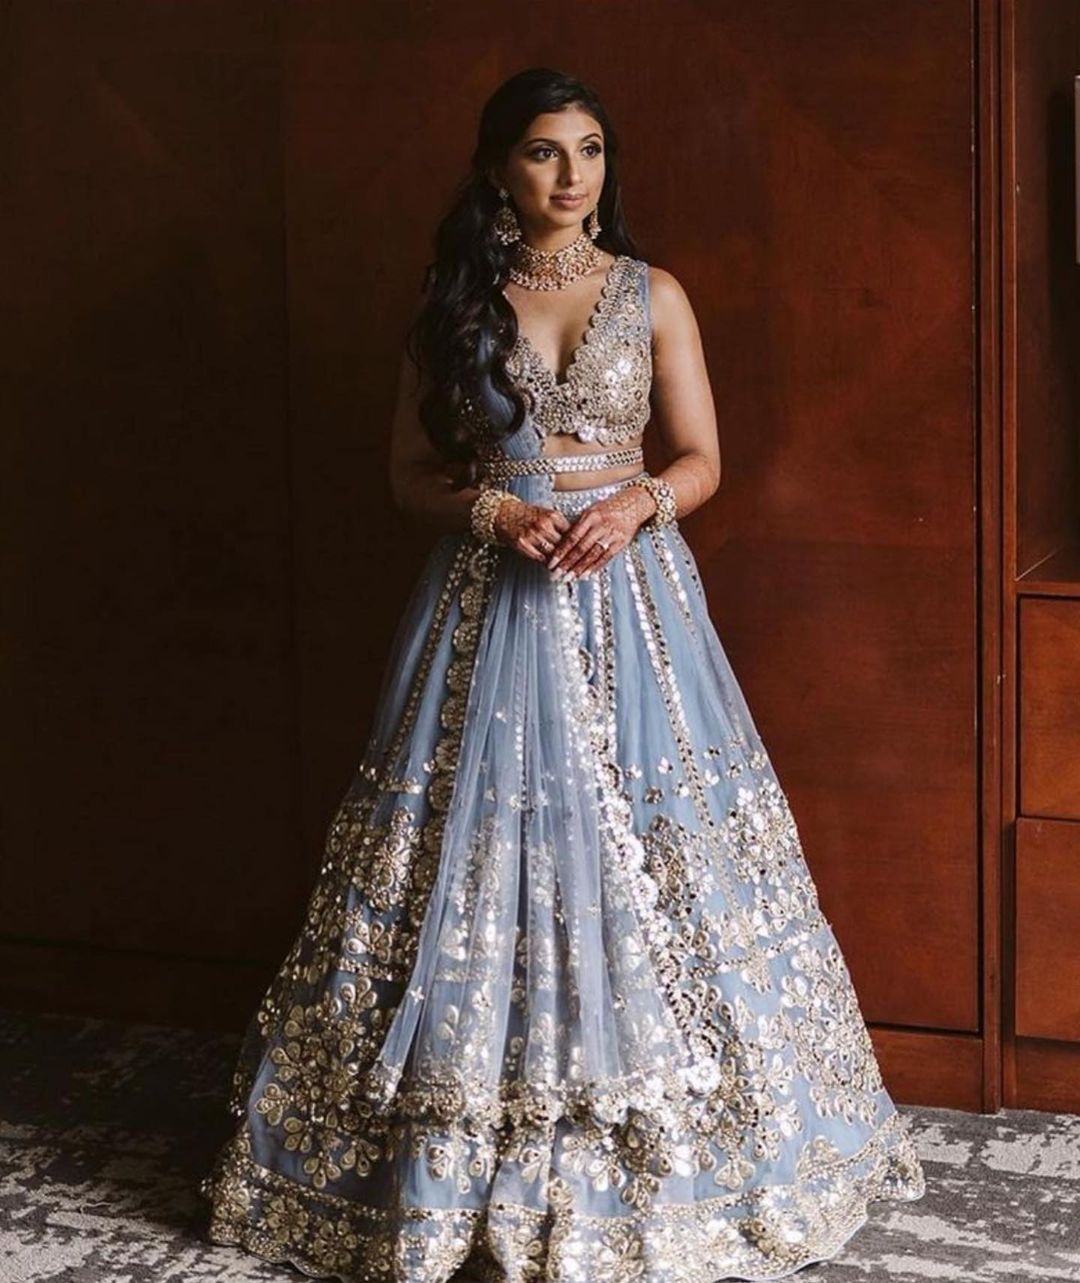 Indian Wedding Dresses in Nj: Shopping Guide for the Indians in the East  Coast